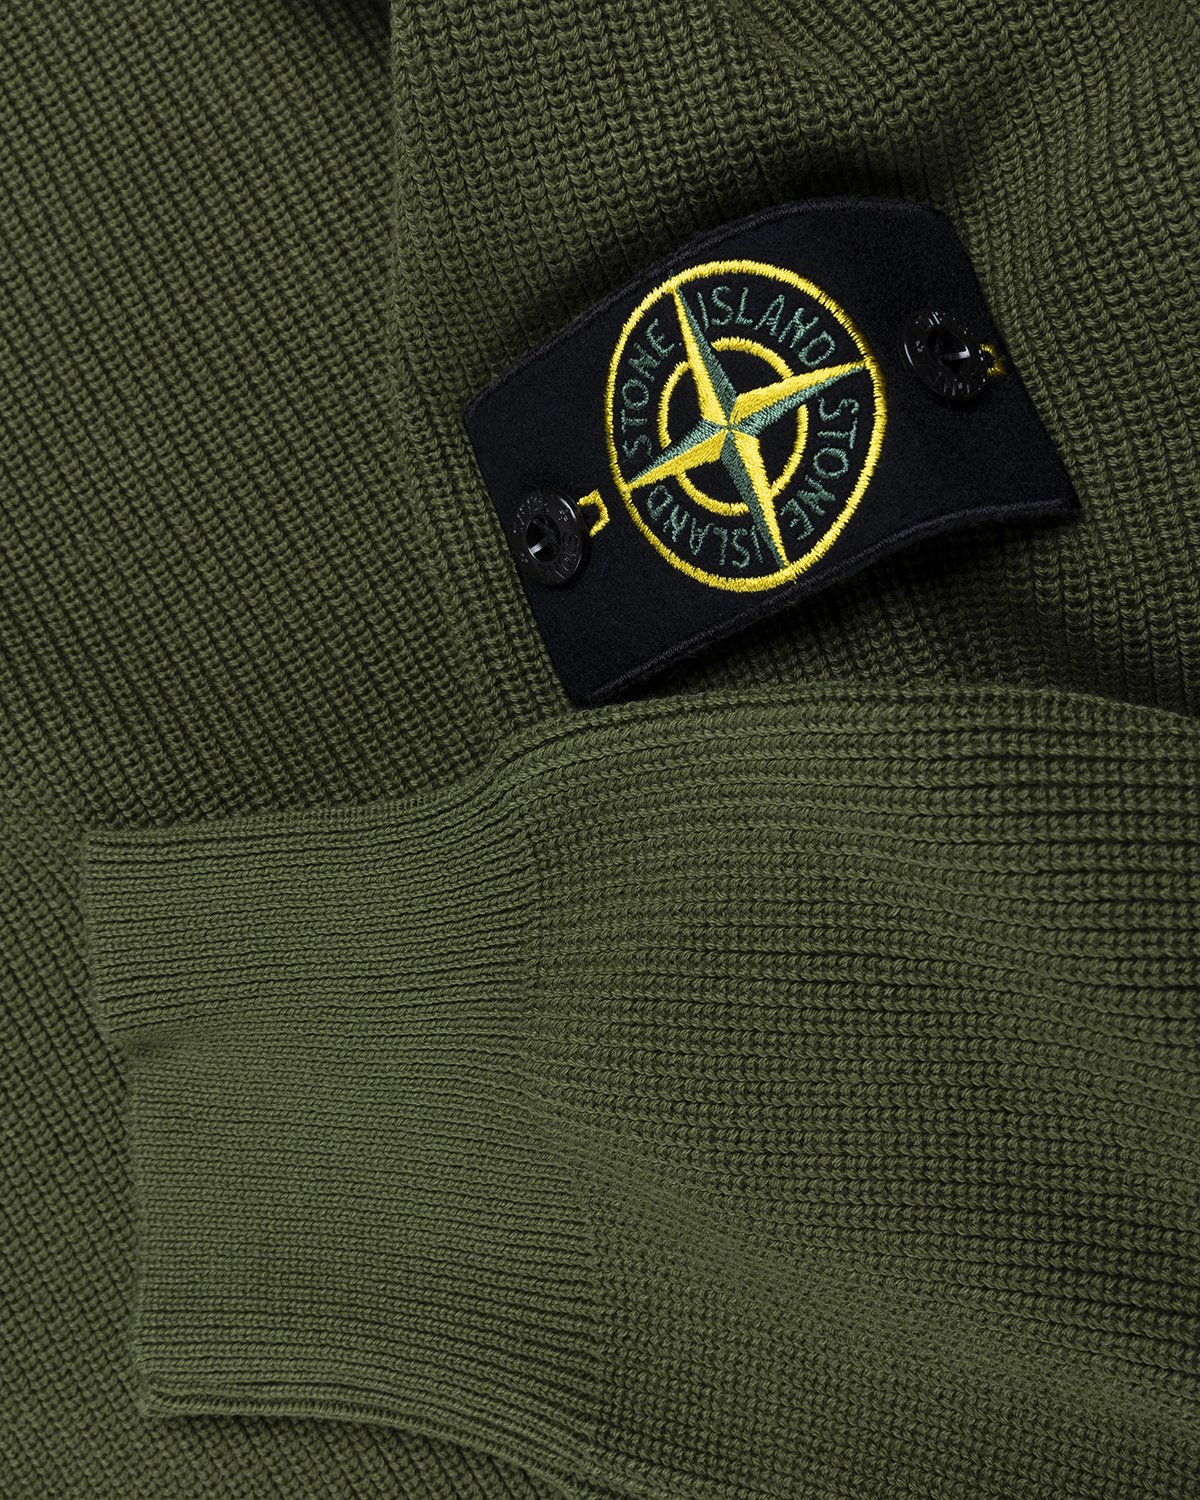 Stone Island - 550D8 Ribbed Soft Cotton Knit Olive - Clothing - Green - Image 4